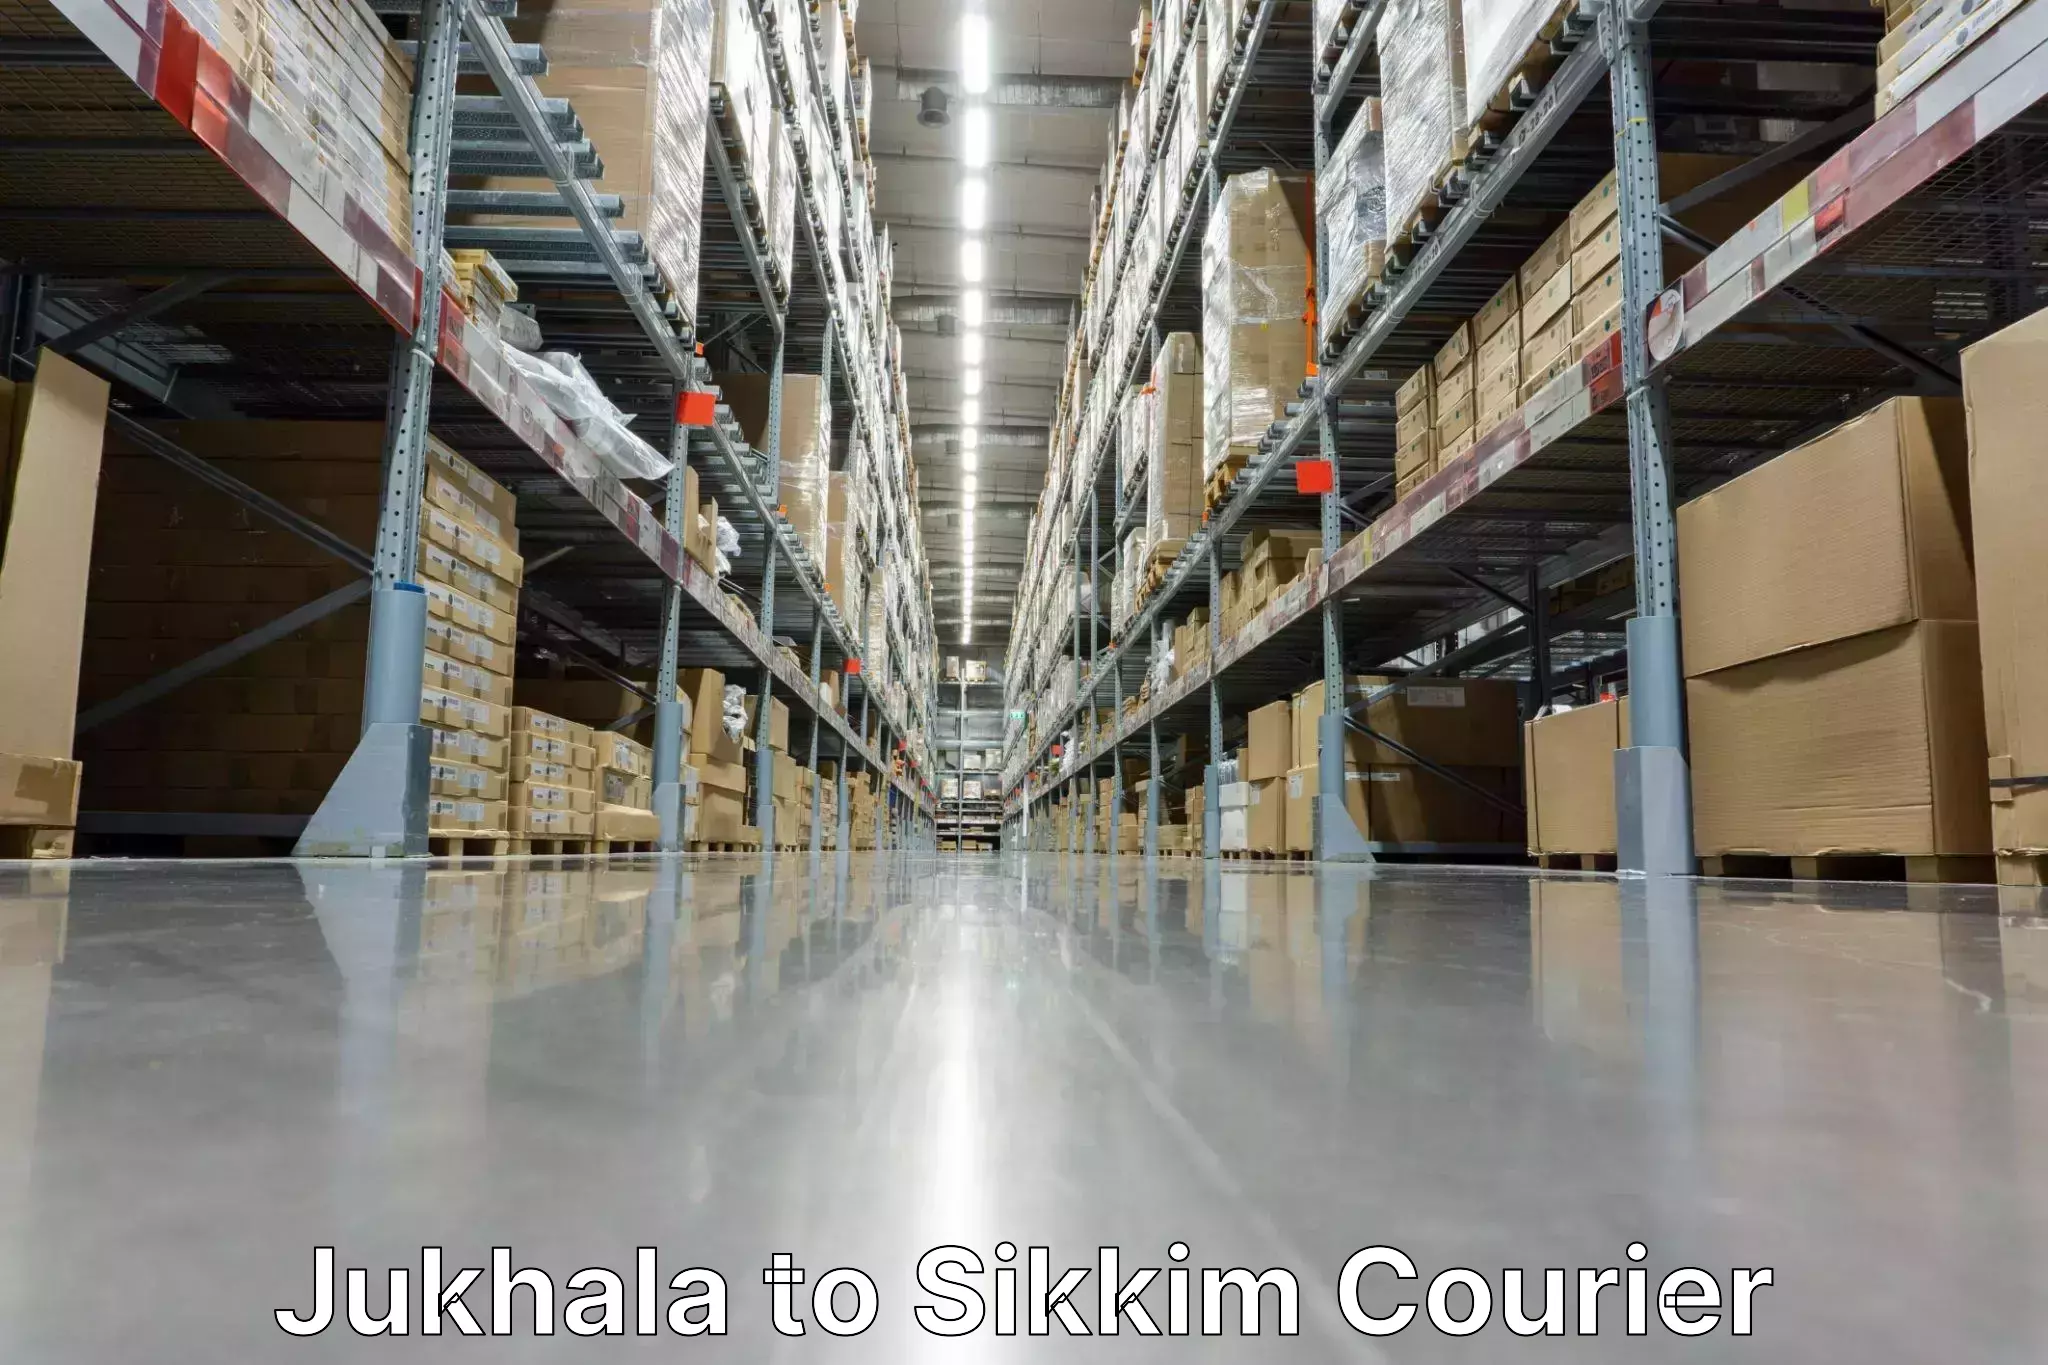 Express courier capabilities Jukhala to Pelling